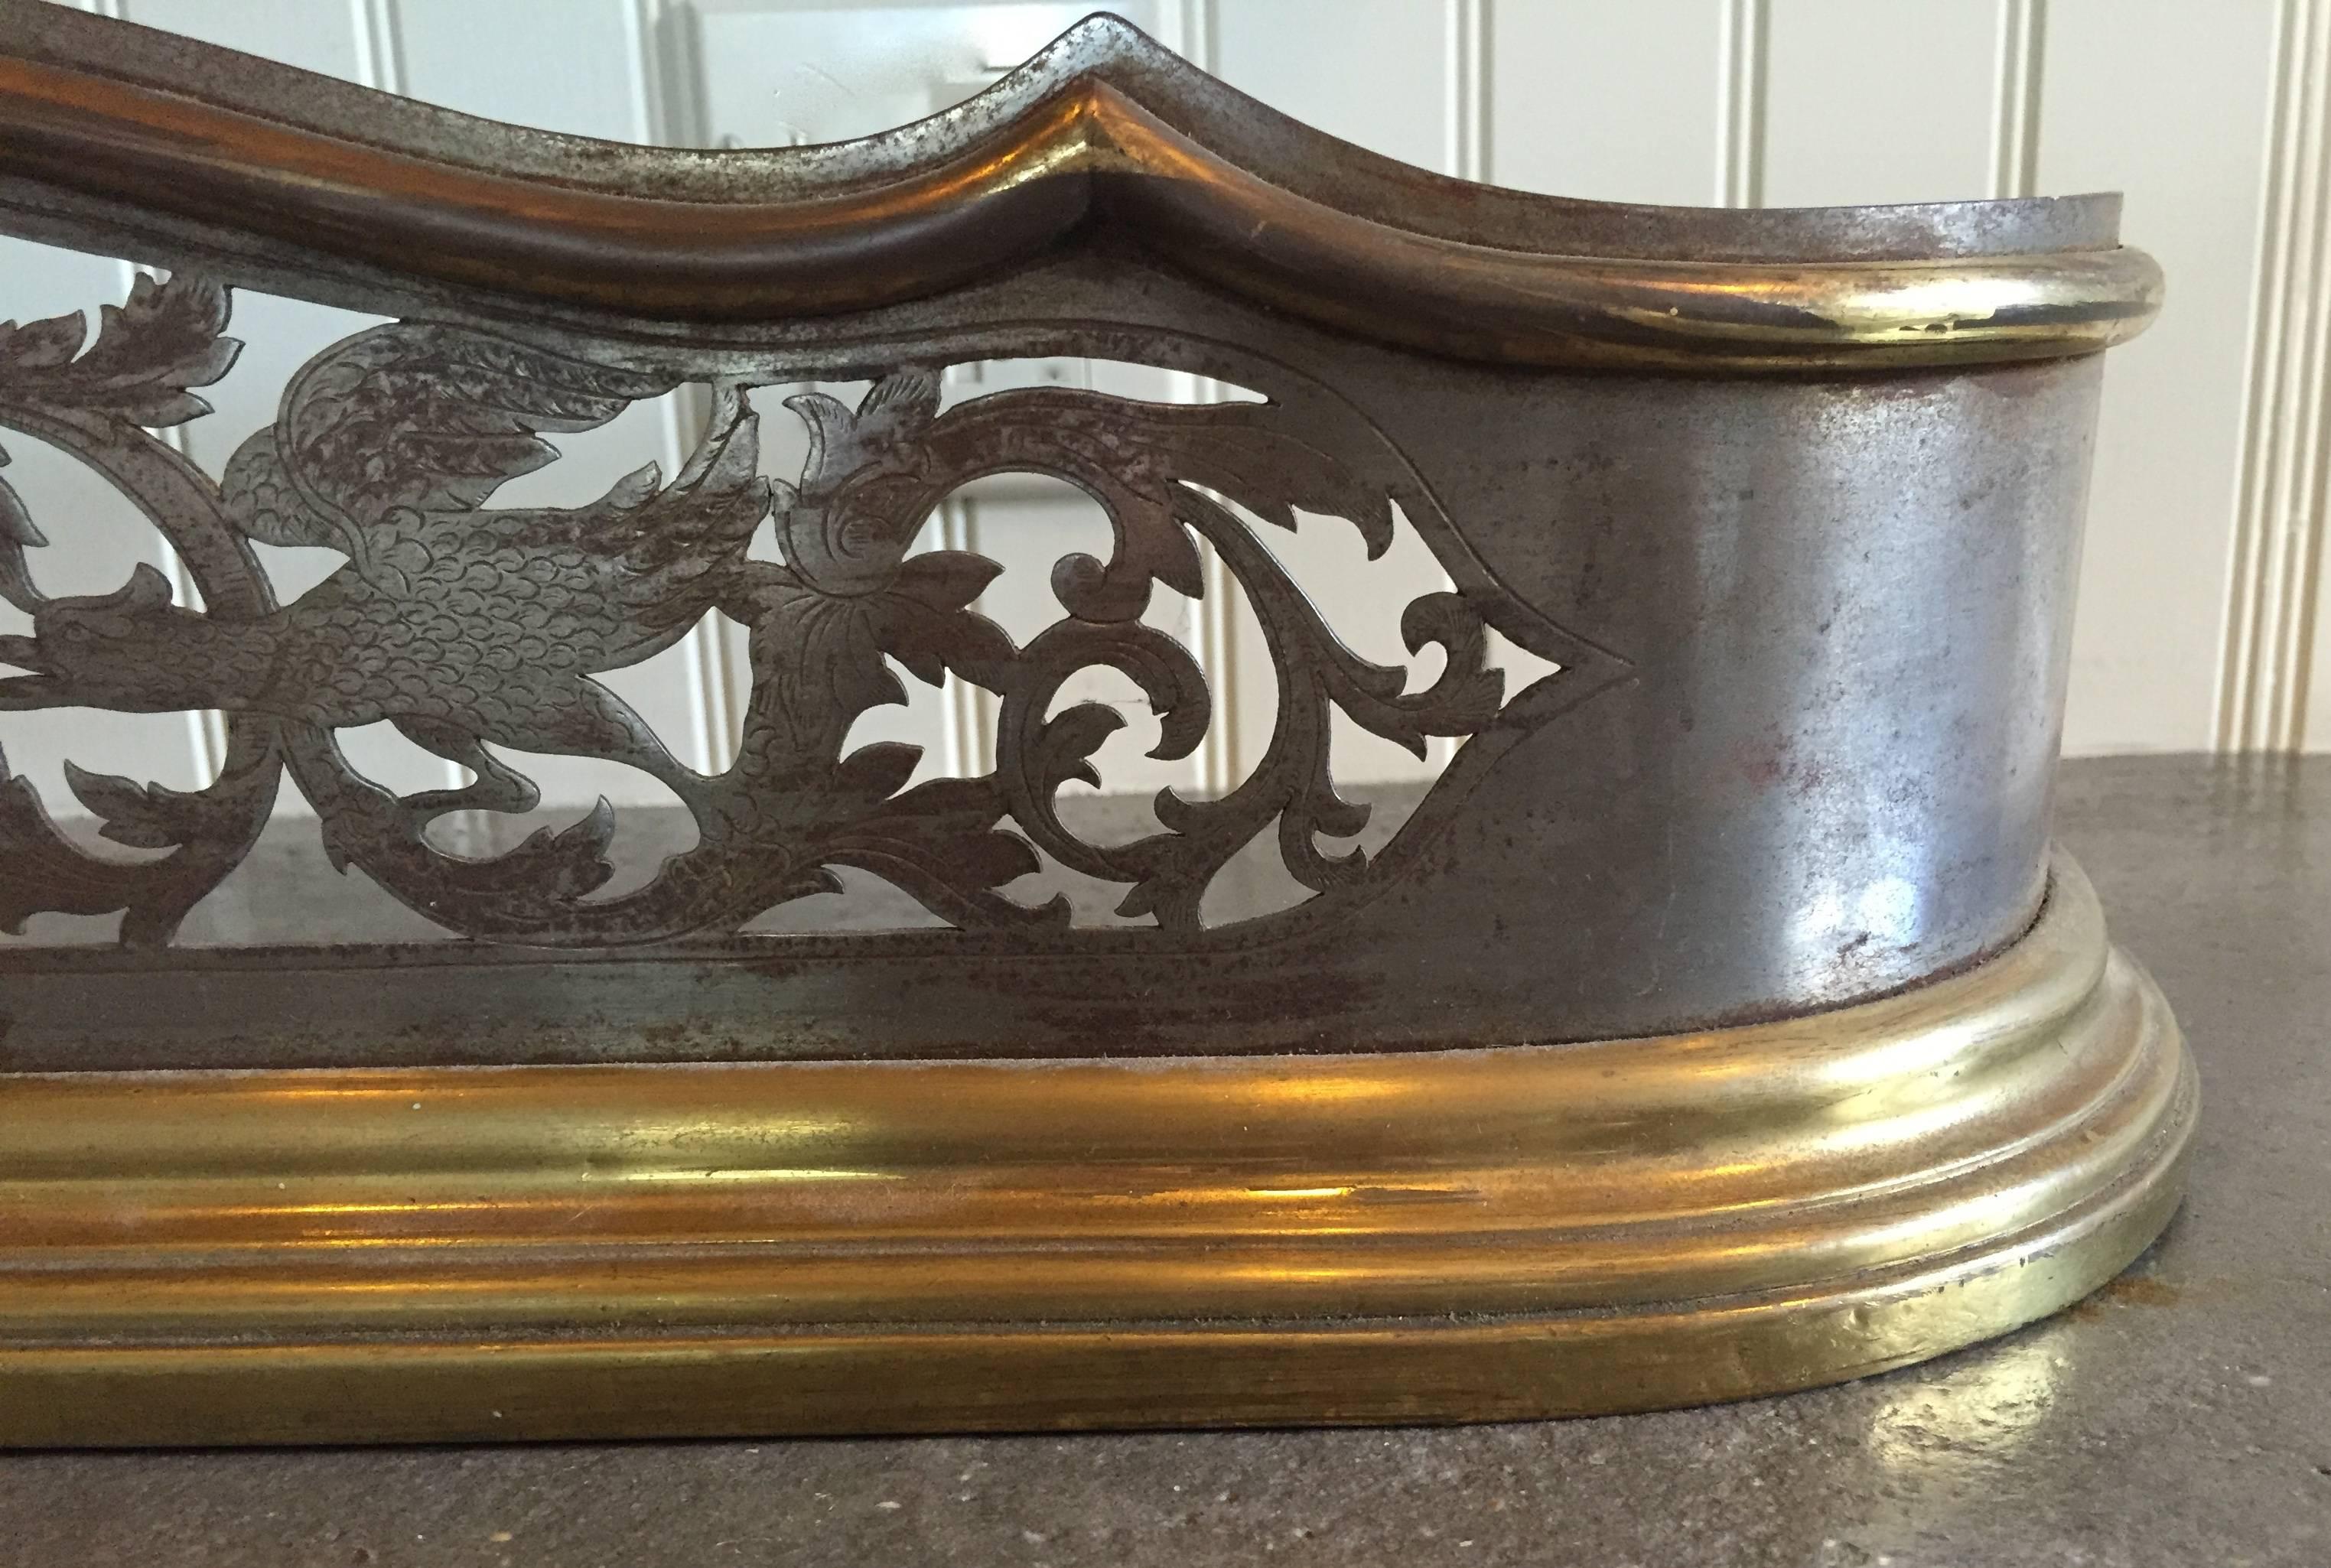 Finely detailed with a hand pierced and incised design showing fanciful birds, dragons and flora, this fireplace fender is steel, surrounded by upper and lower molded edges of polished brass.

It is left as is with its wonderful patina of age, but